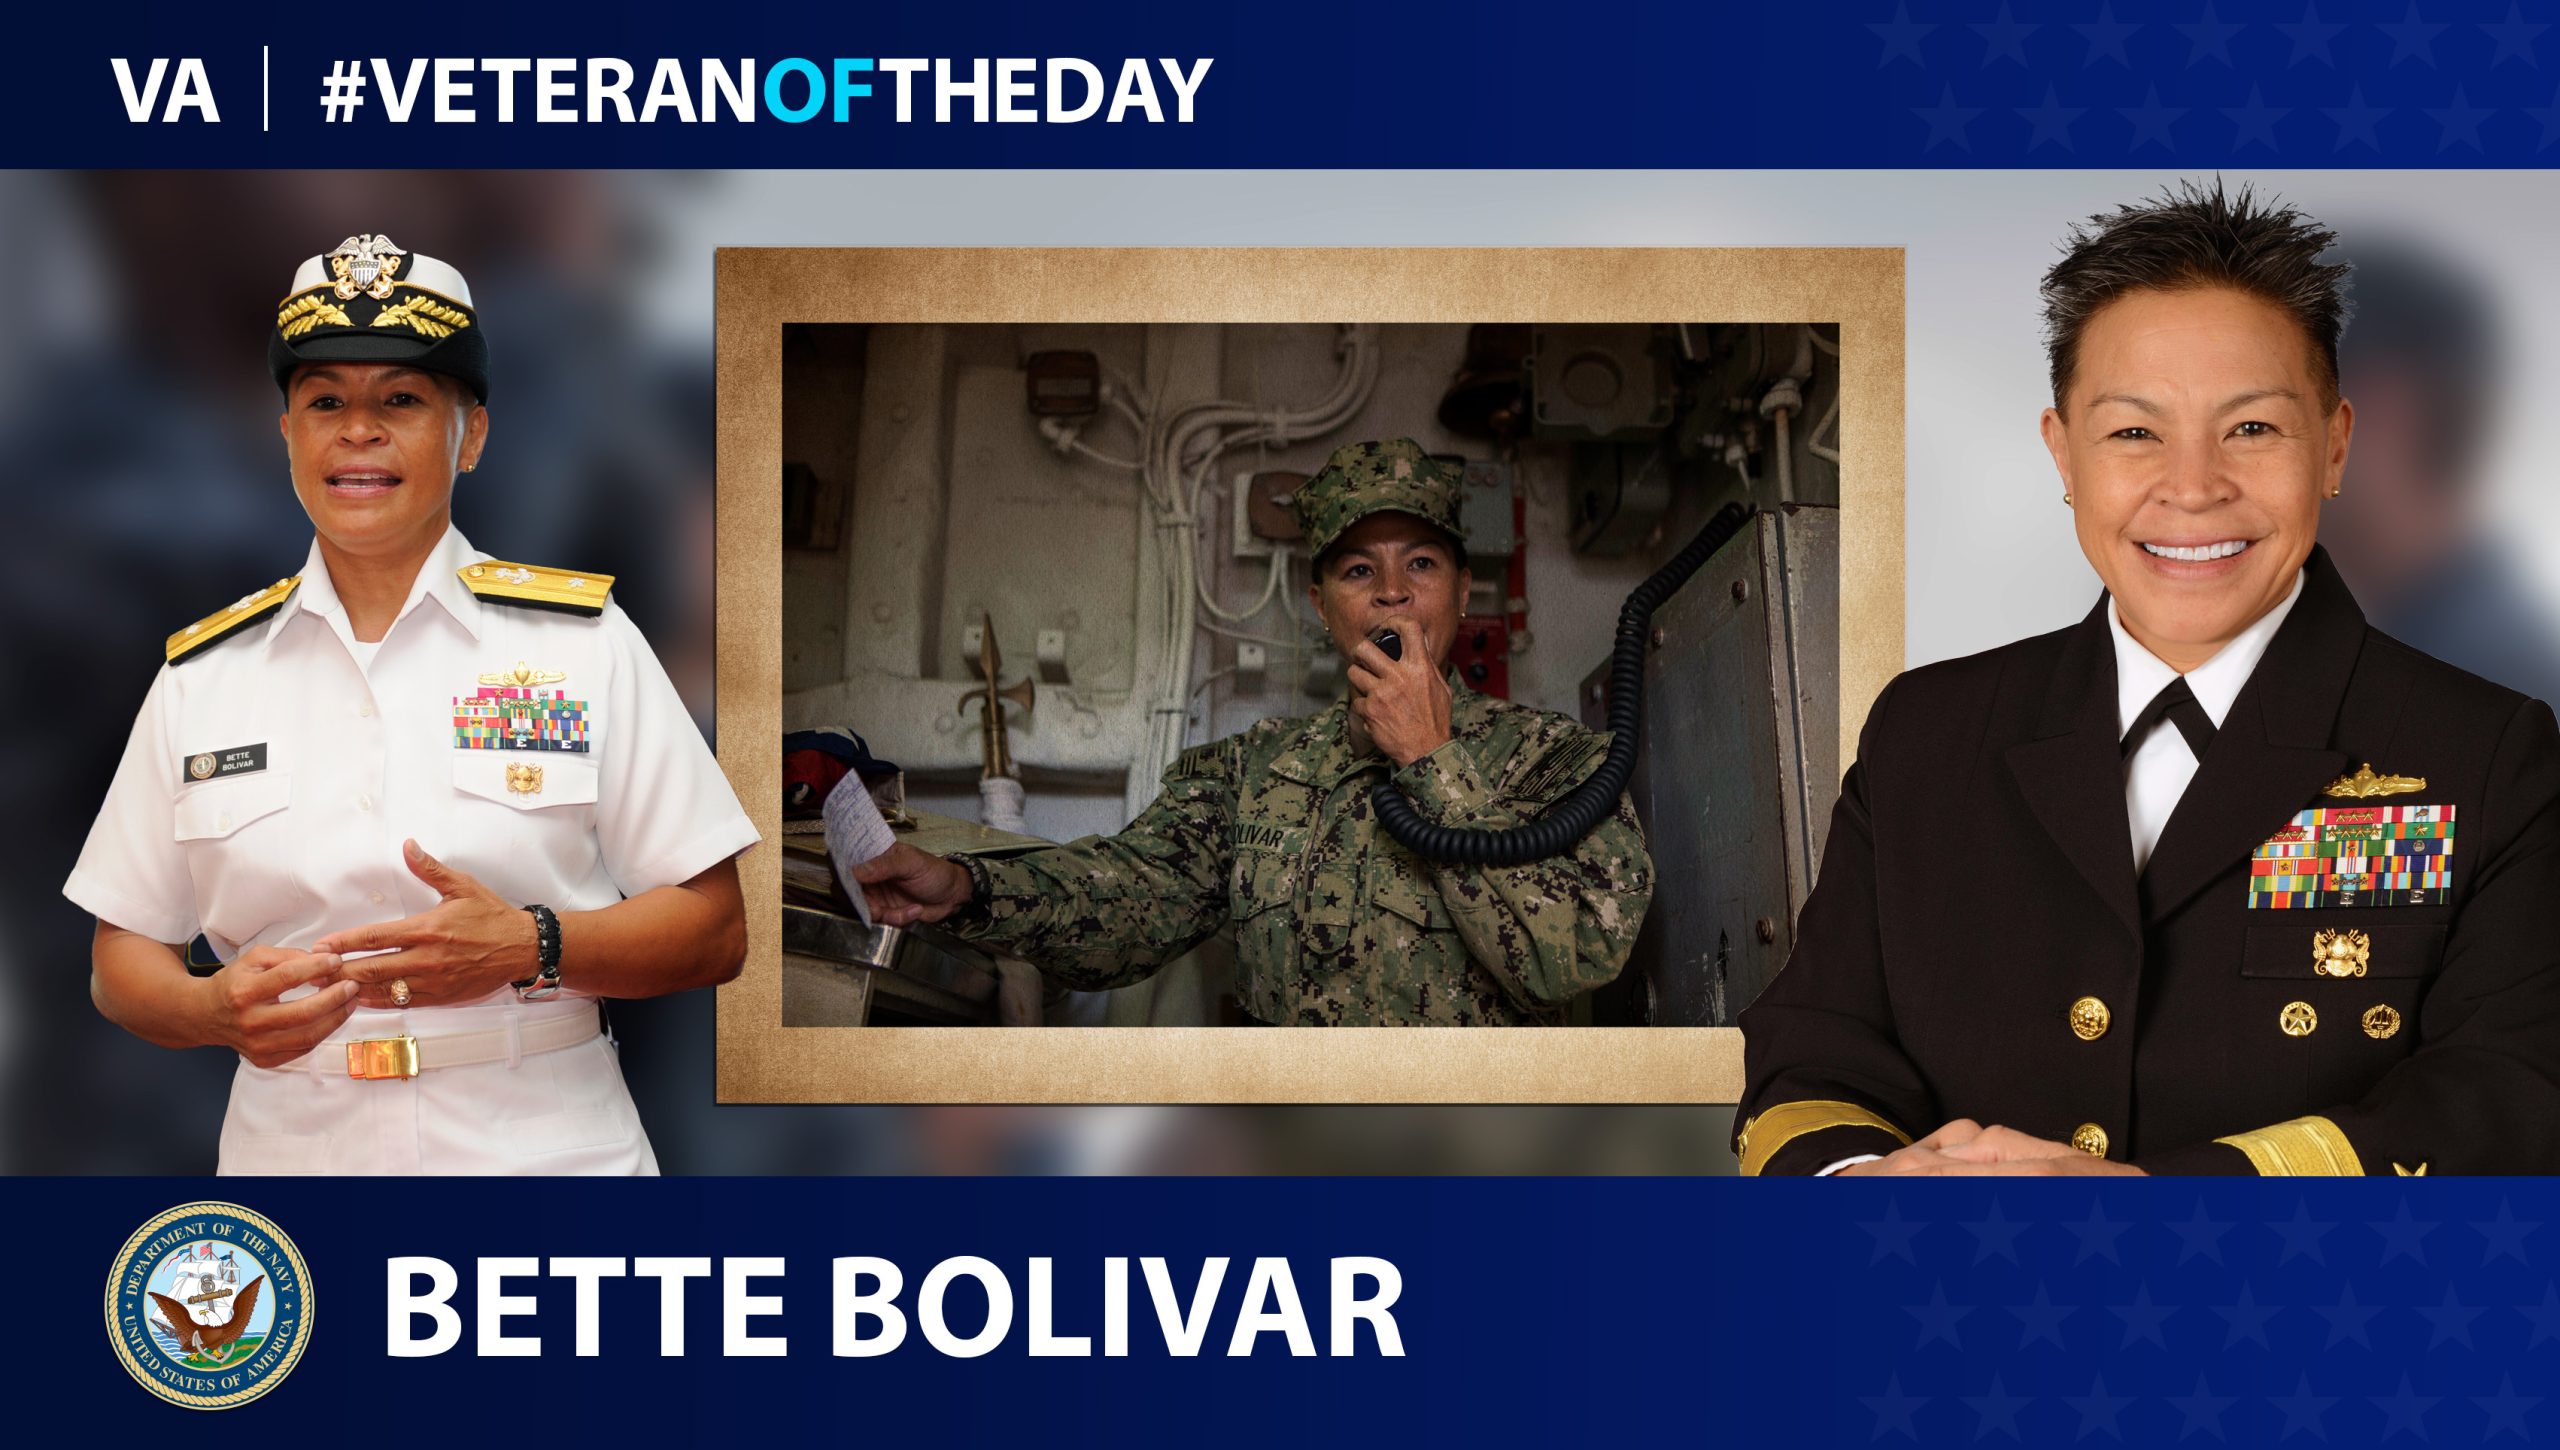 Today’s #VeteranOfTheDay is Navy Veteran Bette Bolivar, who was one of the first Filipino American graduates of the U.S. Naval Academy and one of the first women to become a diver in the Navy.